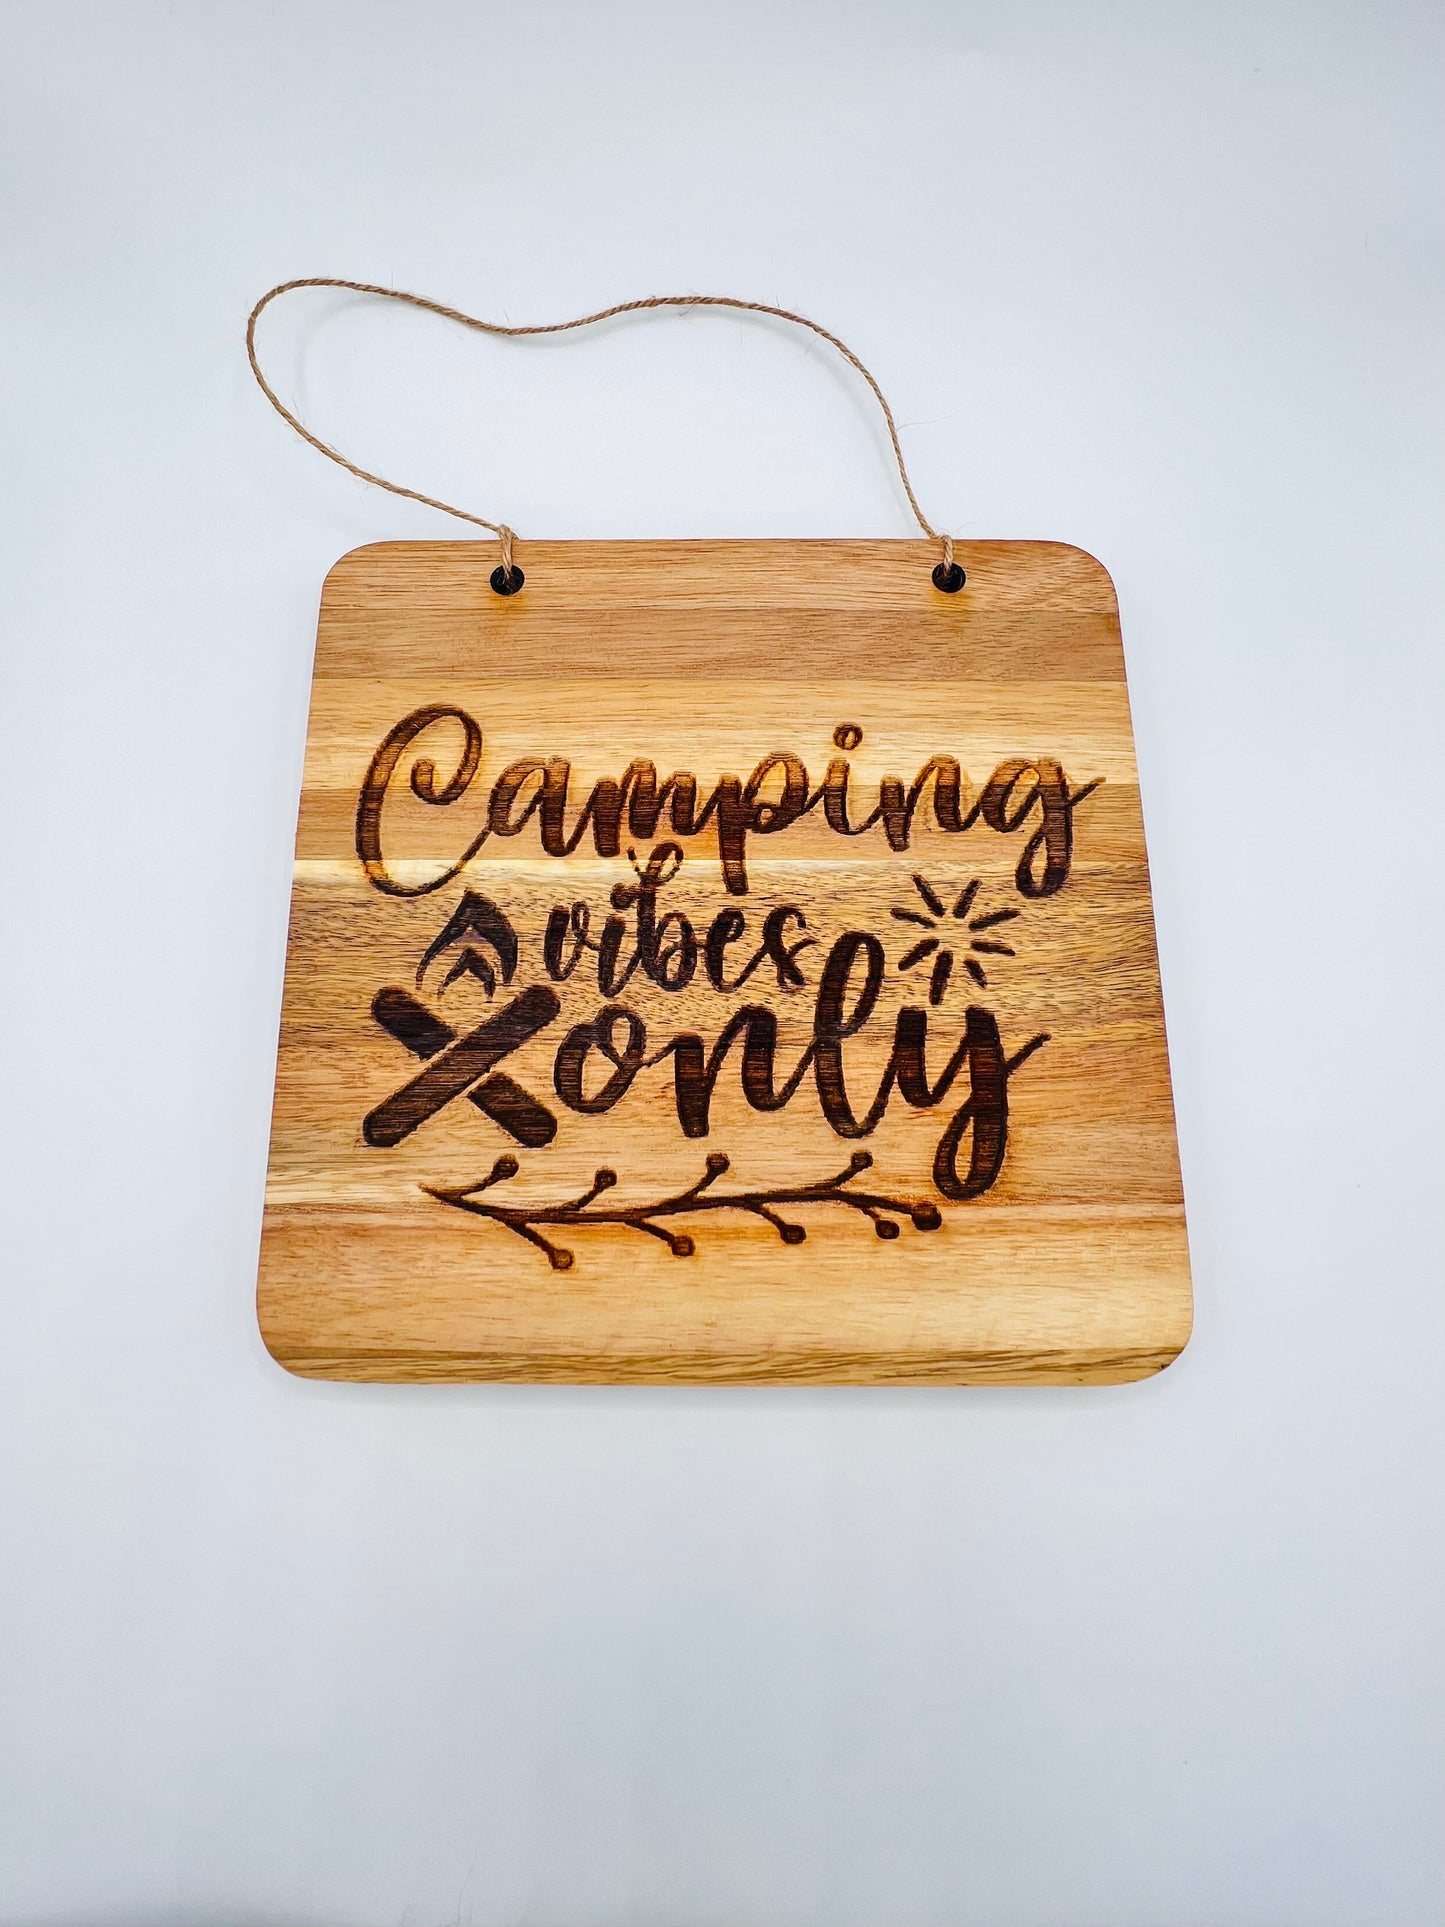 “Camping Vibes Only" Engraved on Acacia Wood